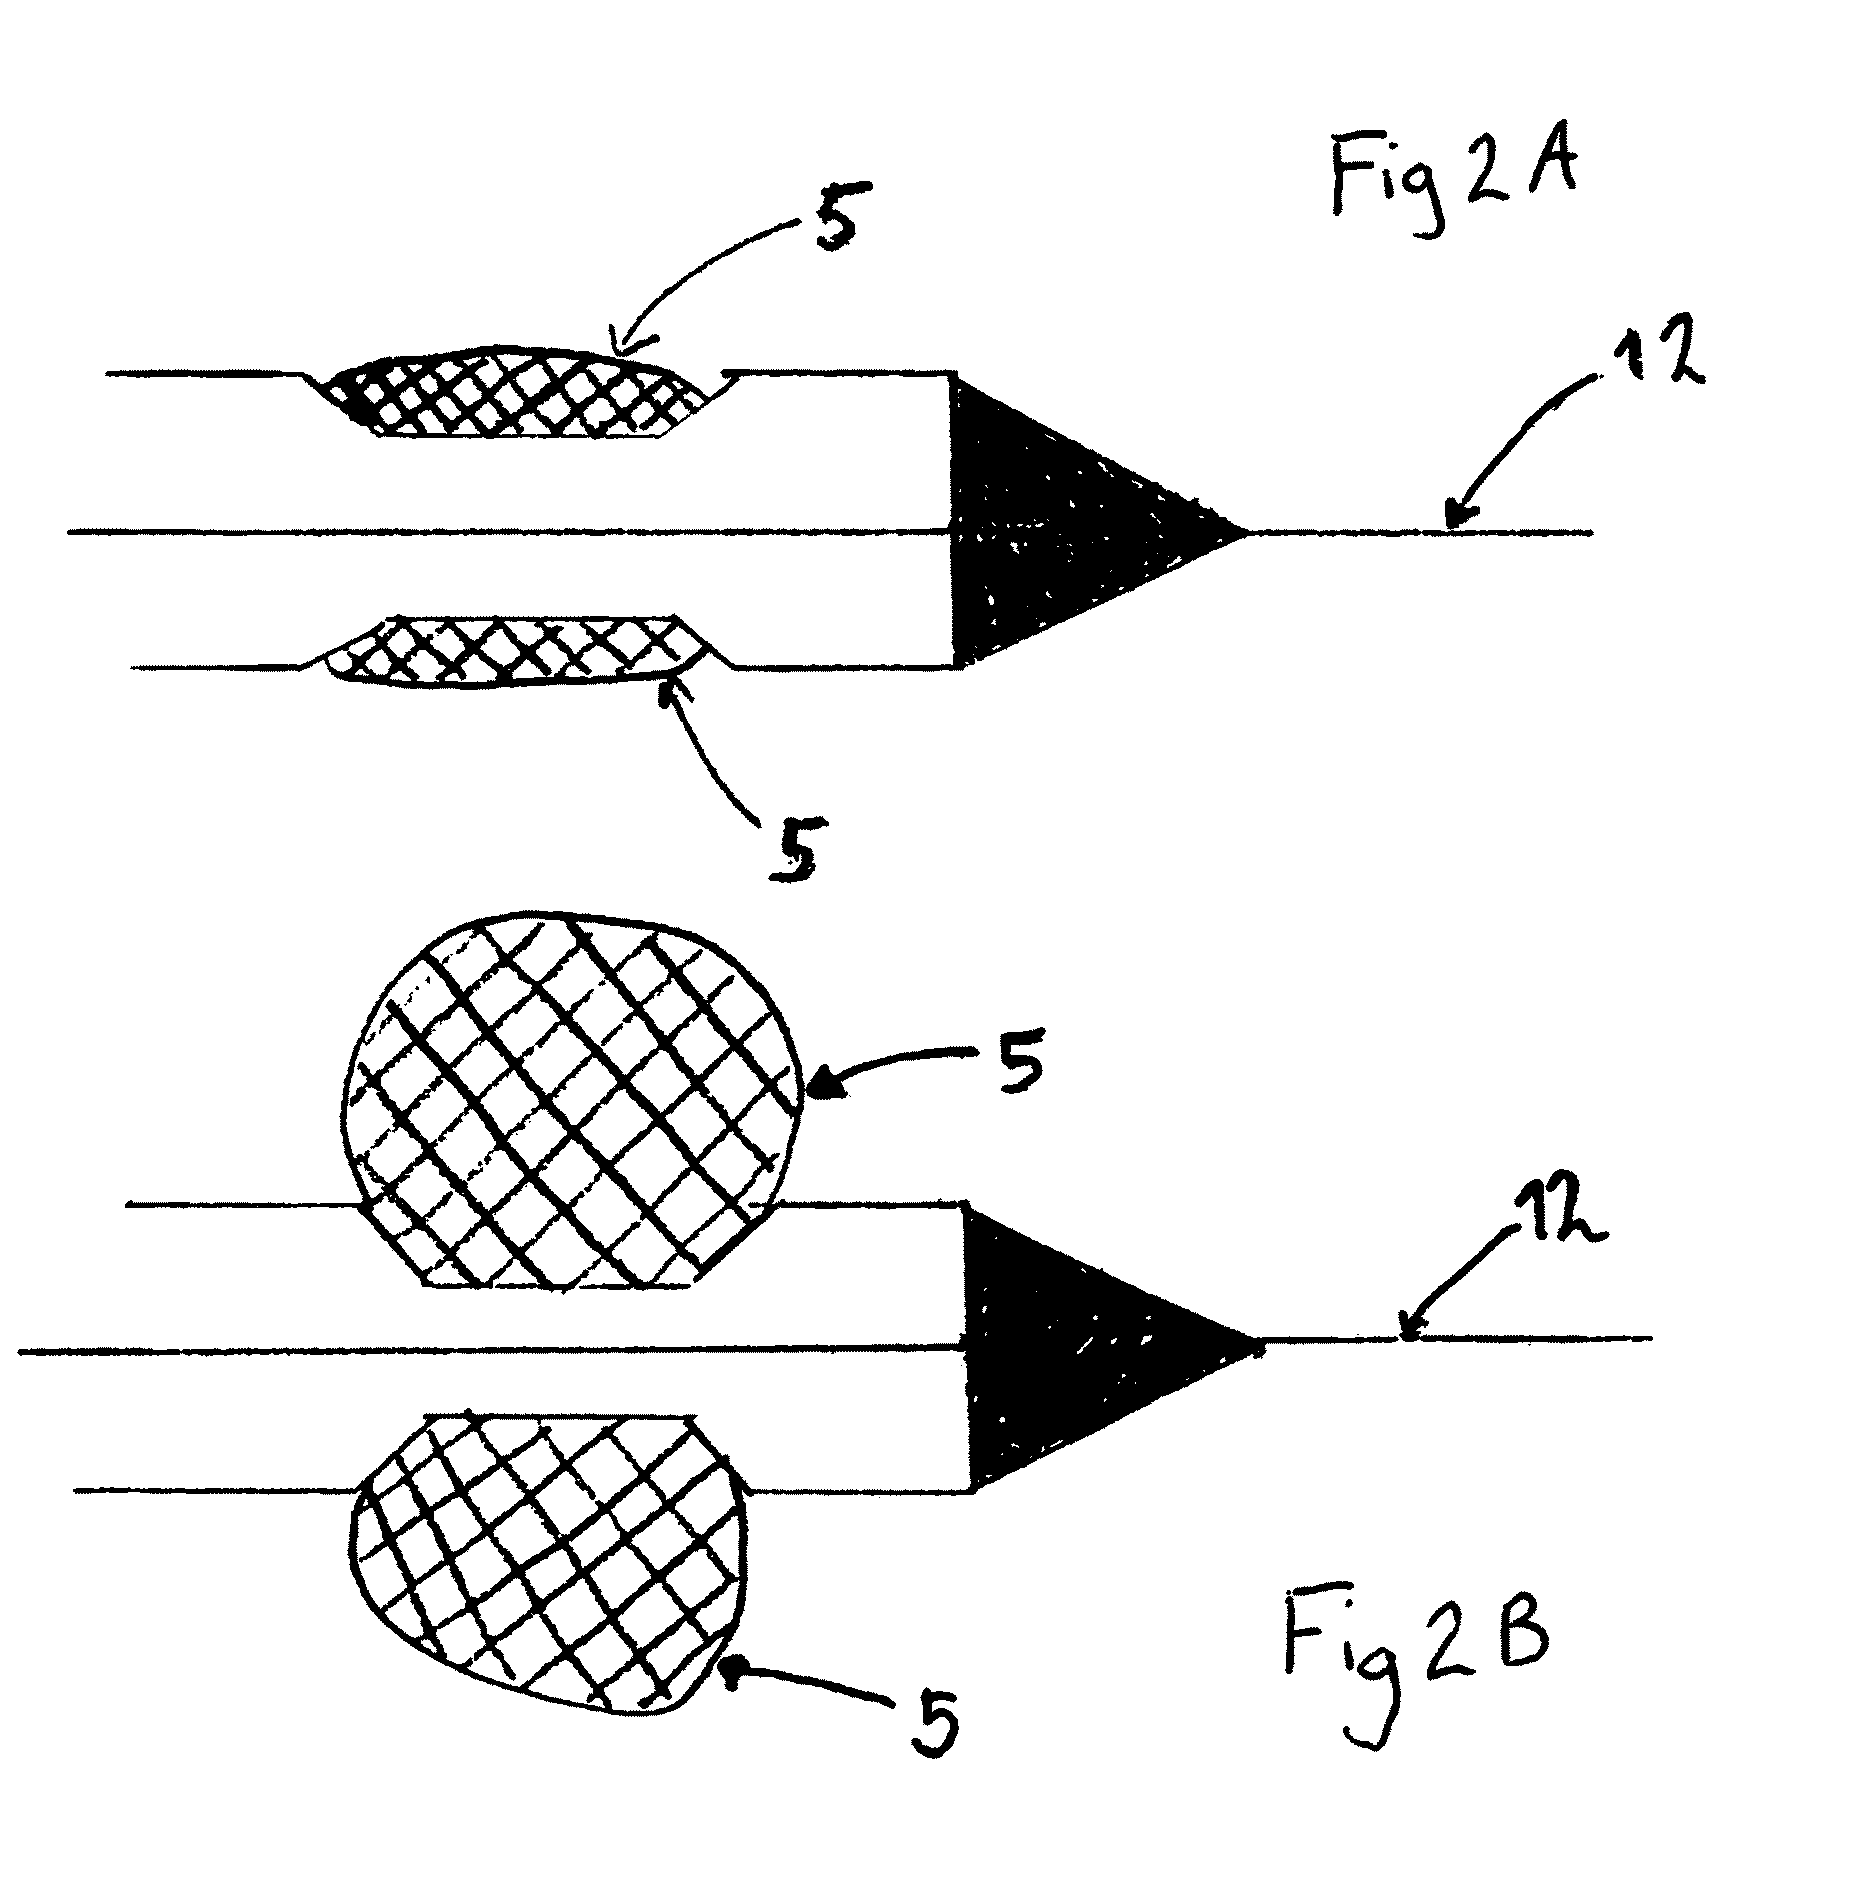 Method for delivery of an embolic protection unit